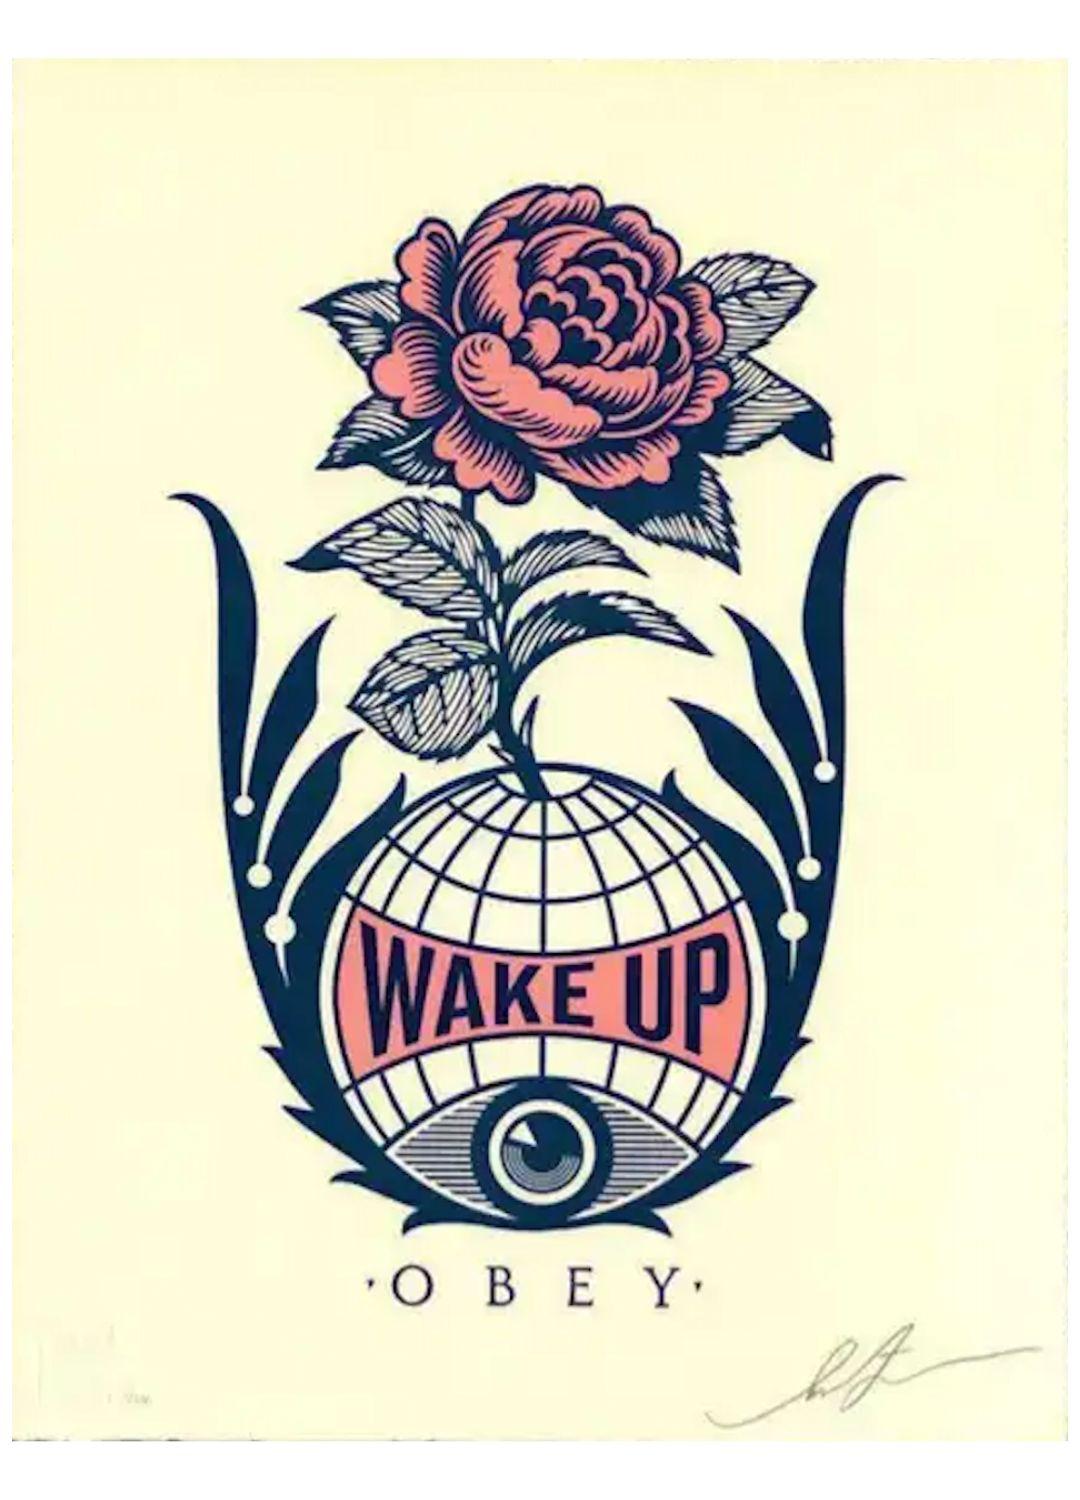 Wake Up Earth, Letterpress Print on Cream Cotton Paper, 2020

Letterpress on cream cotton paper with hand-deckled edges.
Limited edition of 500.
This work is in excellent condition.
Hand-signed by artist, Hand signed by the artist, recto.
13 × 10